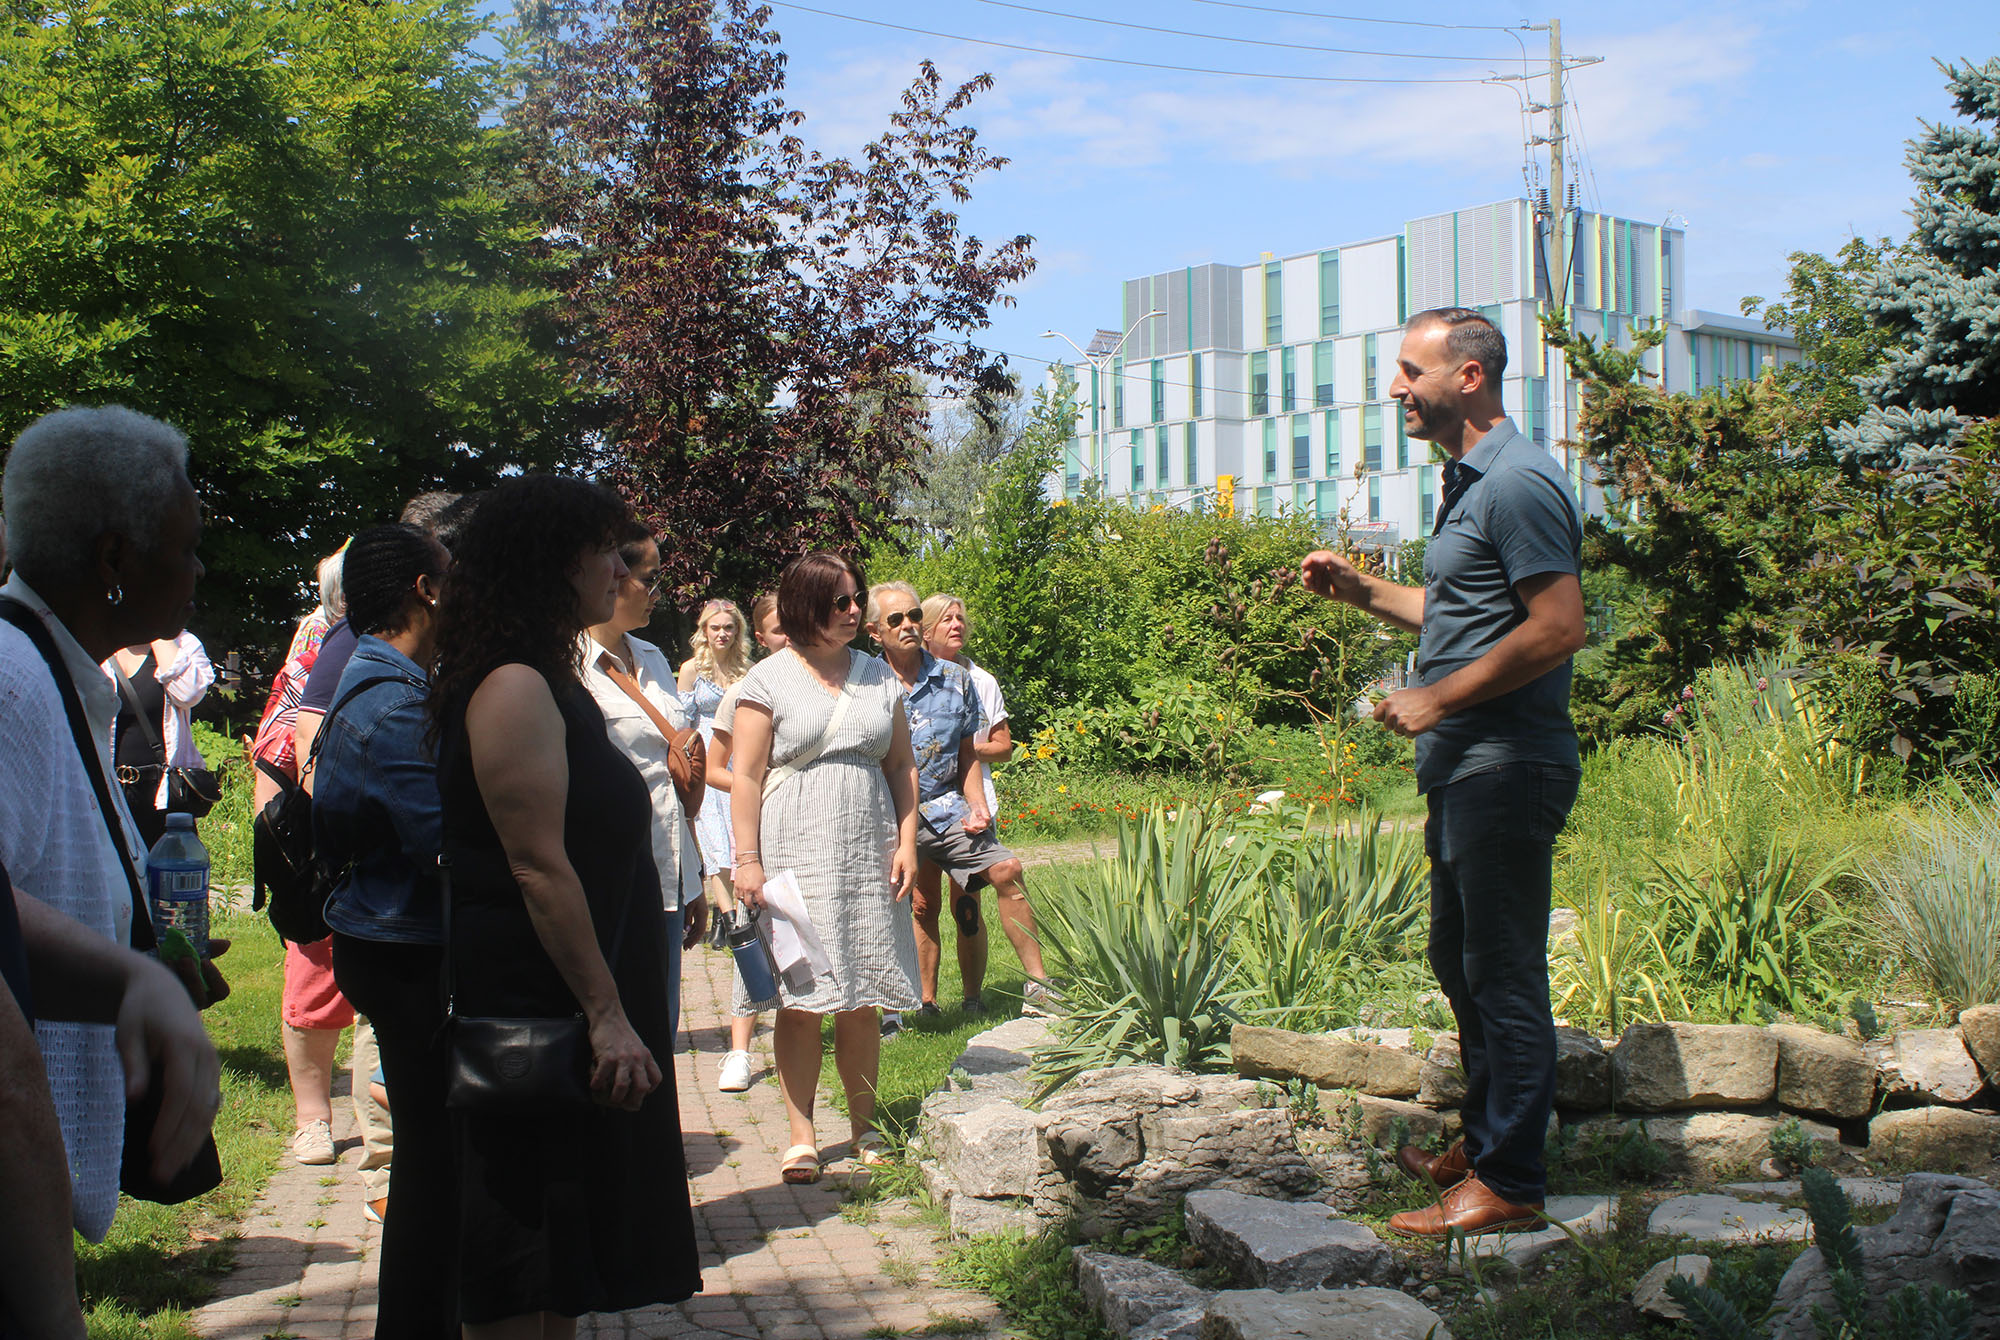 Professor Jason Vodden took attendees on a tour of the horticulture grounds, including a vegetable garden and greenhouse